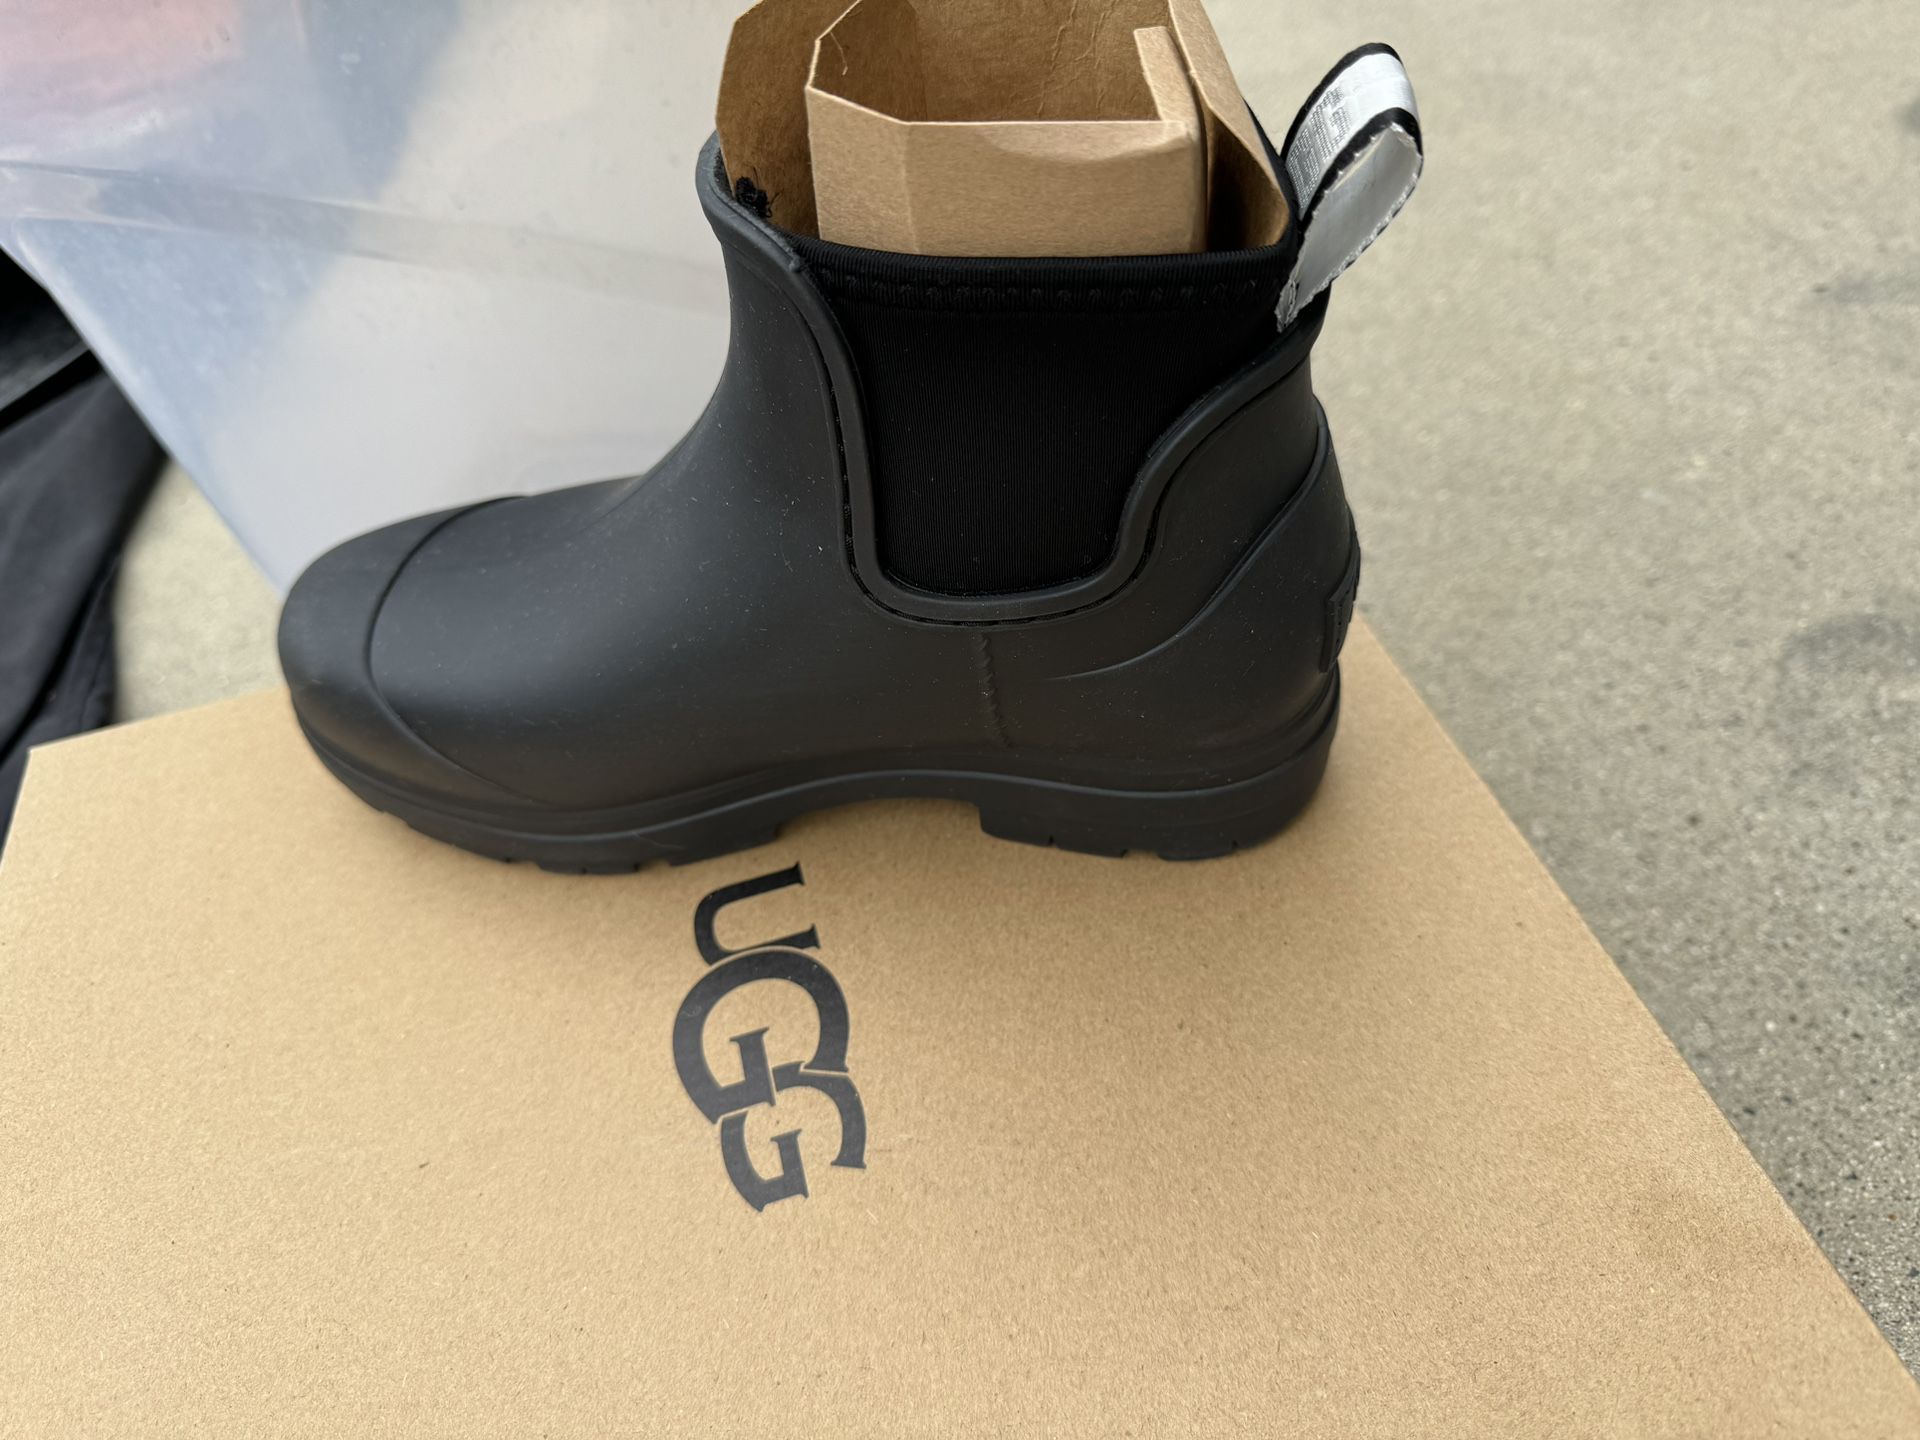 New UGG Boots Size 5